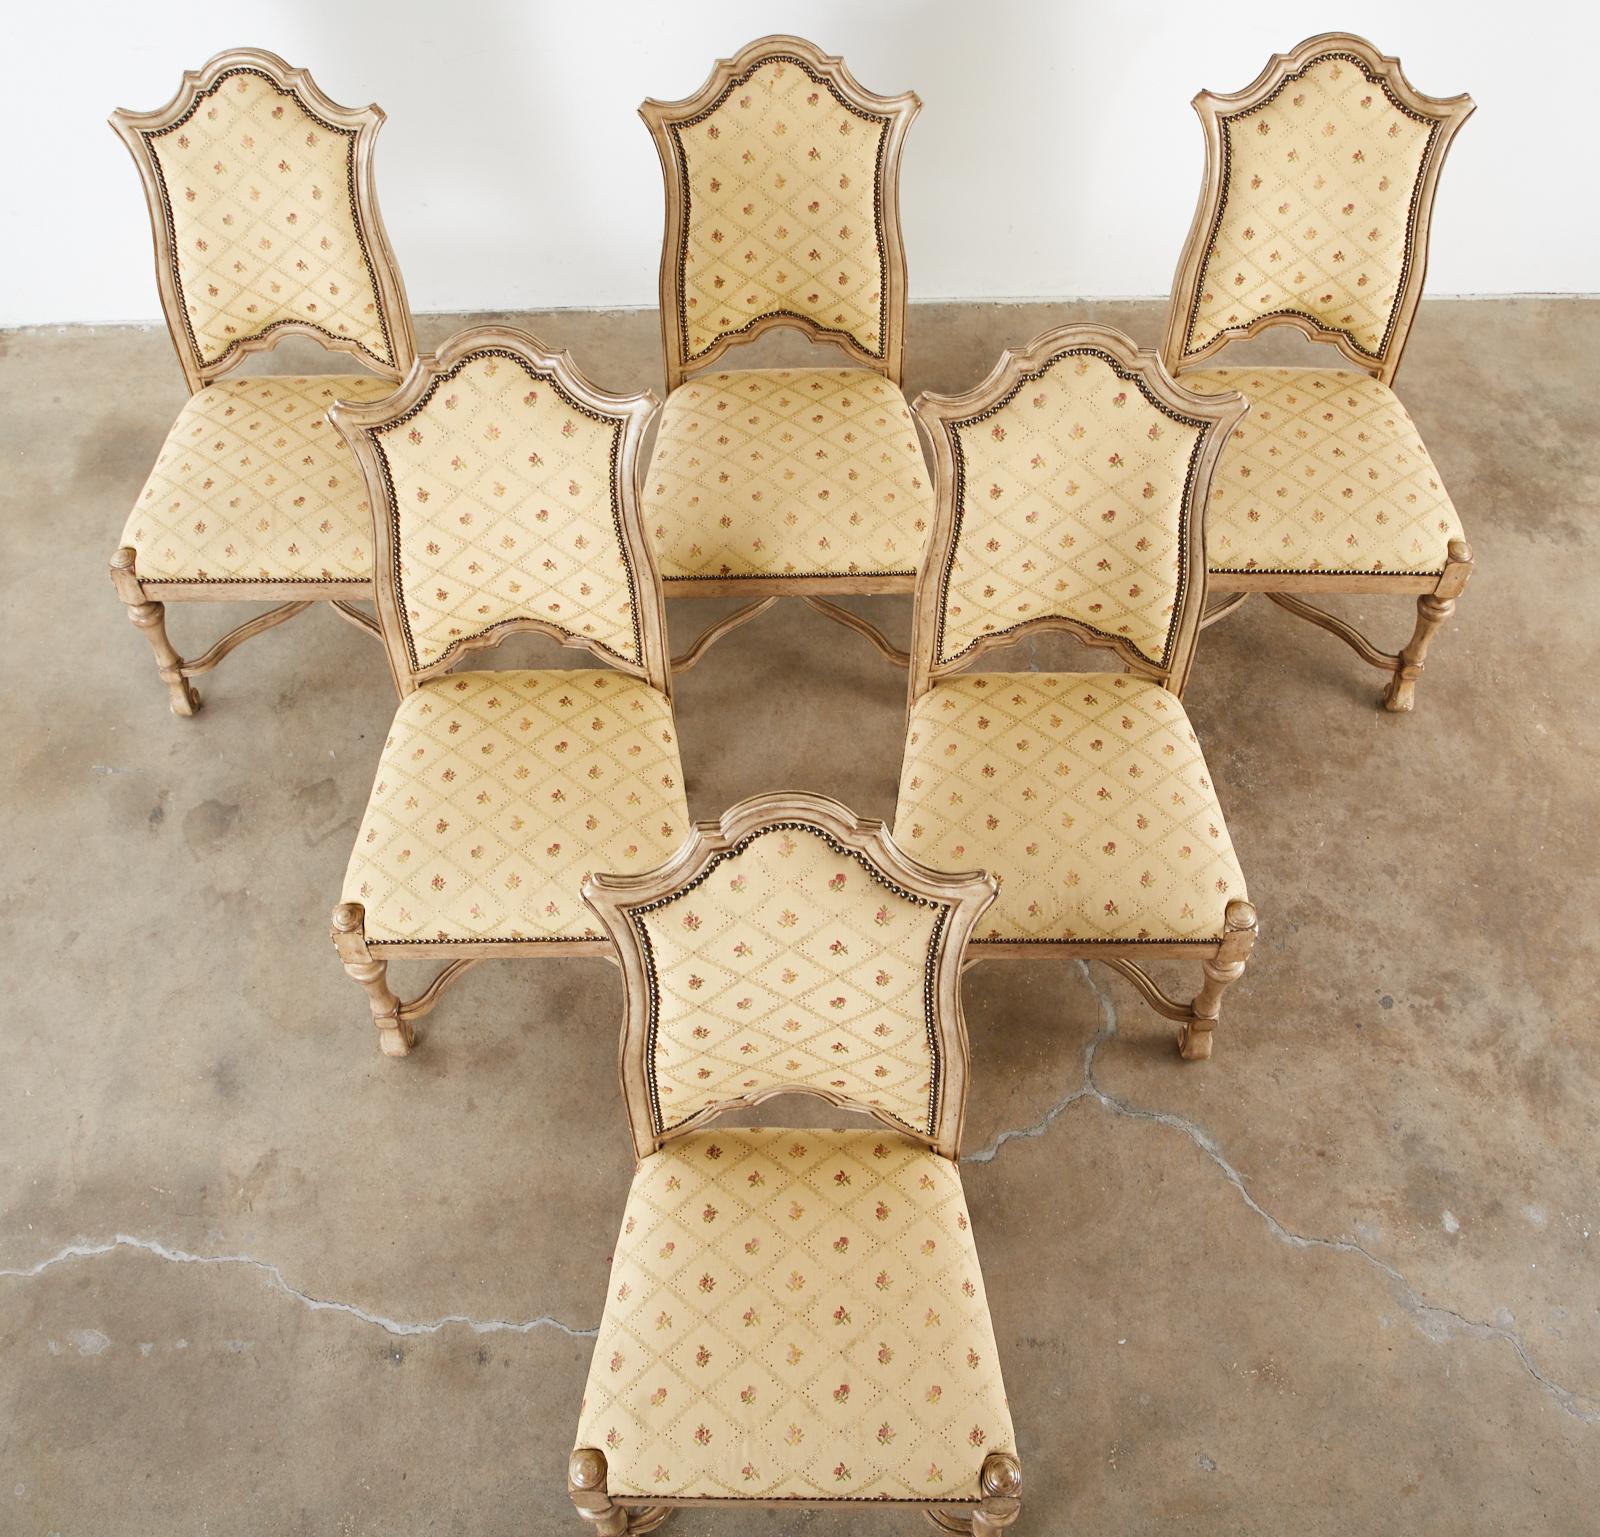 Distinctive set of six lacquered dining chairs by Ferguson Copeland. Made in the grand French Louis XIII style with peaked seat backs. The chairs have a vintage upholstery with brass tack nailhead borders. Supported by turned legs conjoined by x